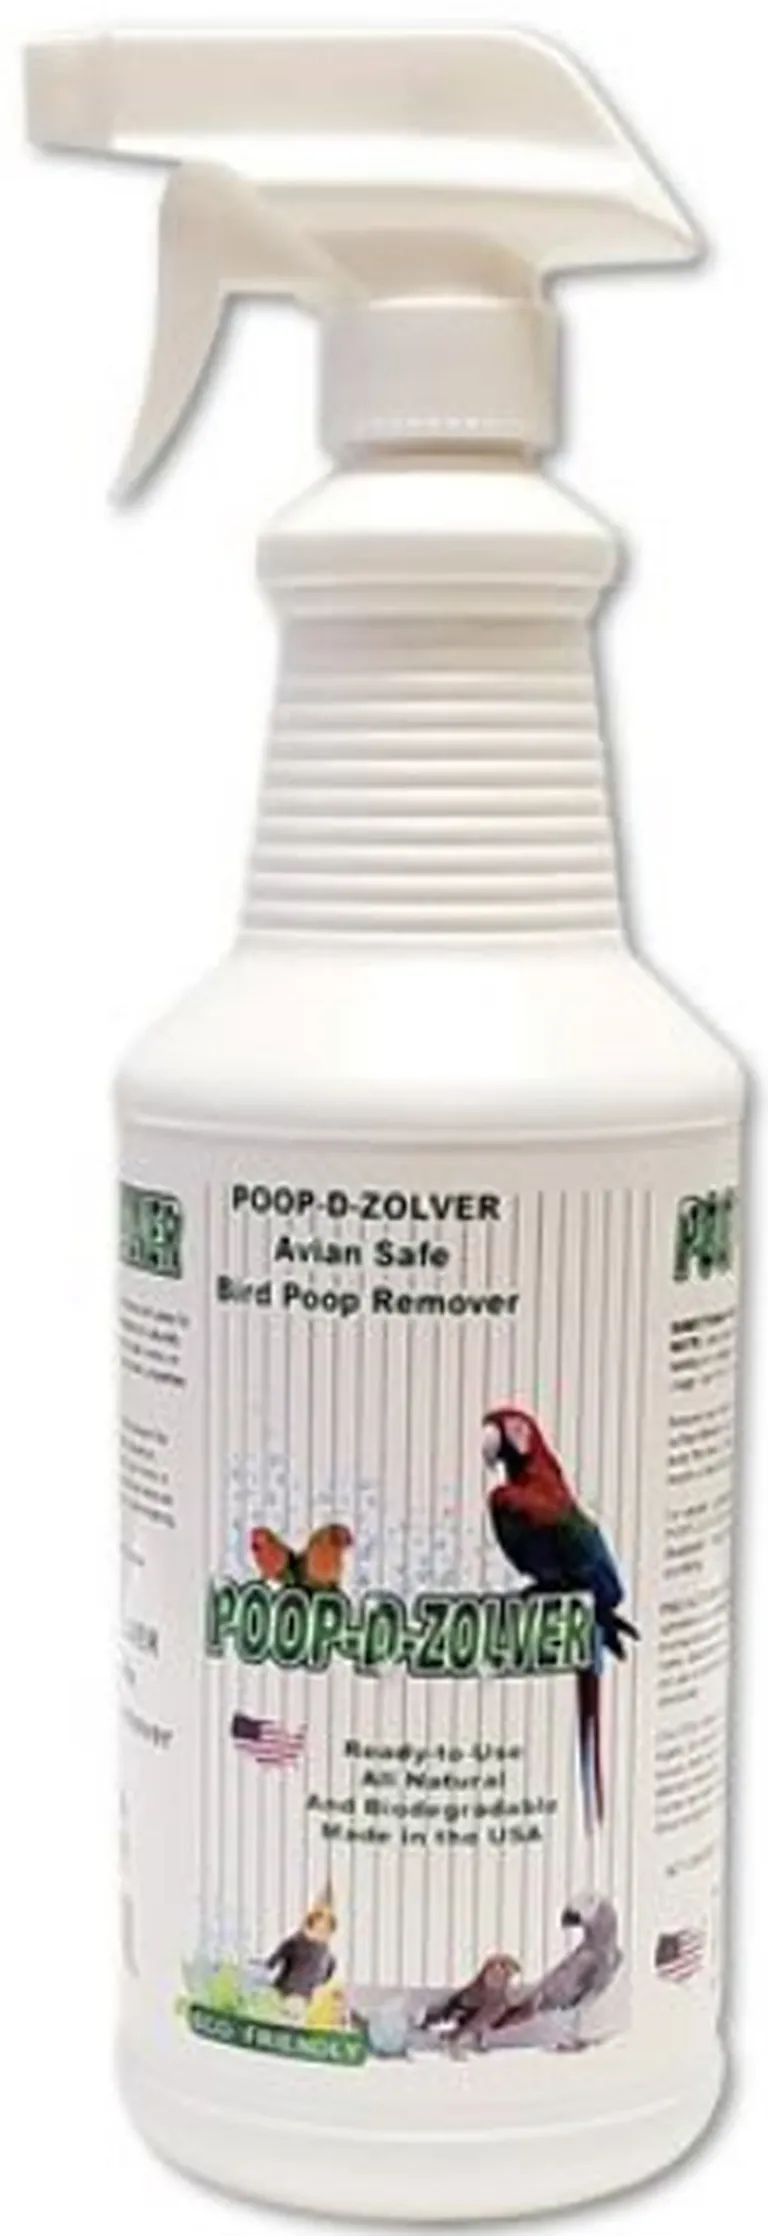 AE Cage Company Poop D Zolver Bird Poop Remover Lime Coconut Scent Photo 1